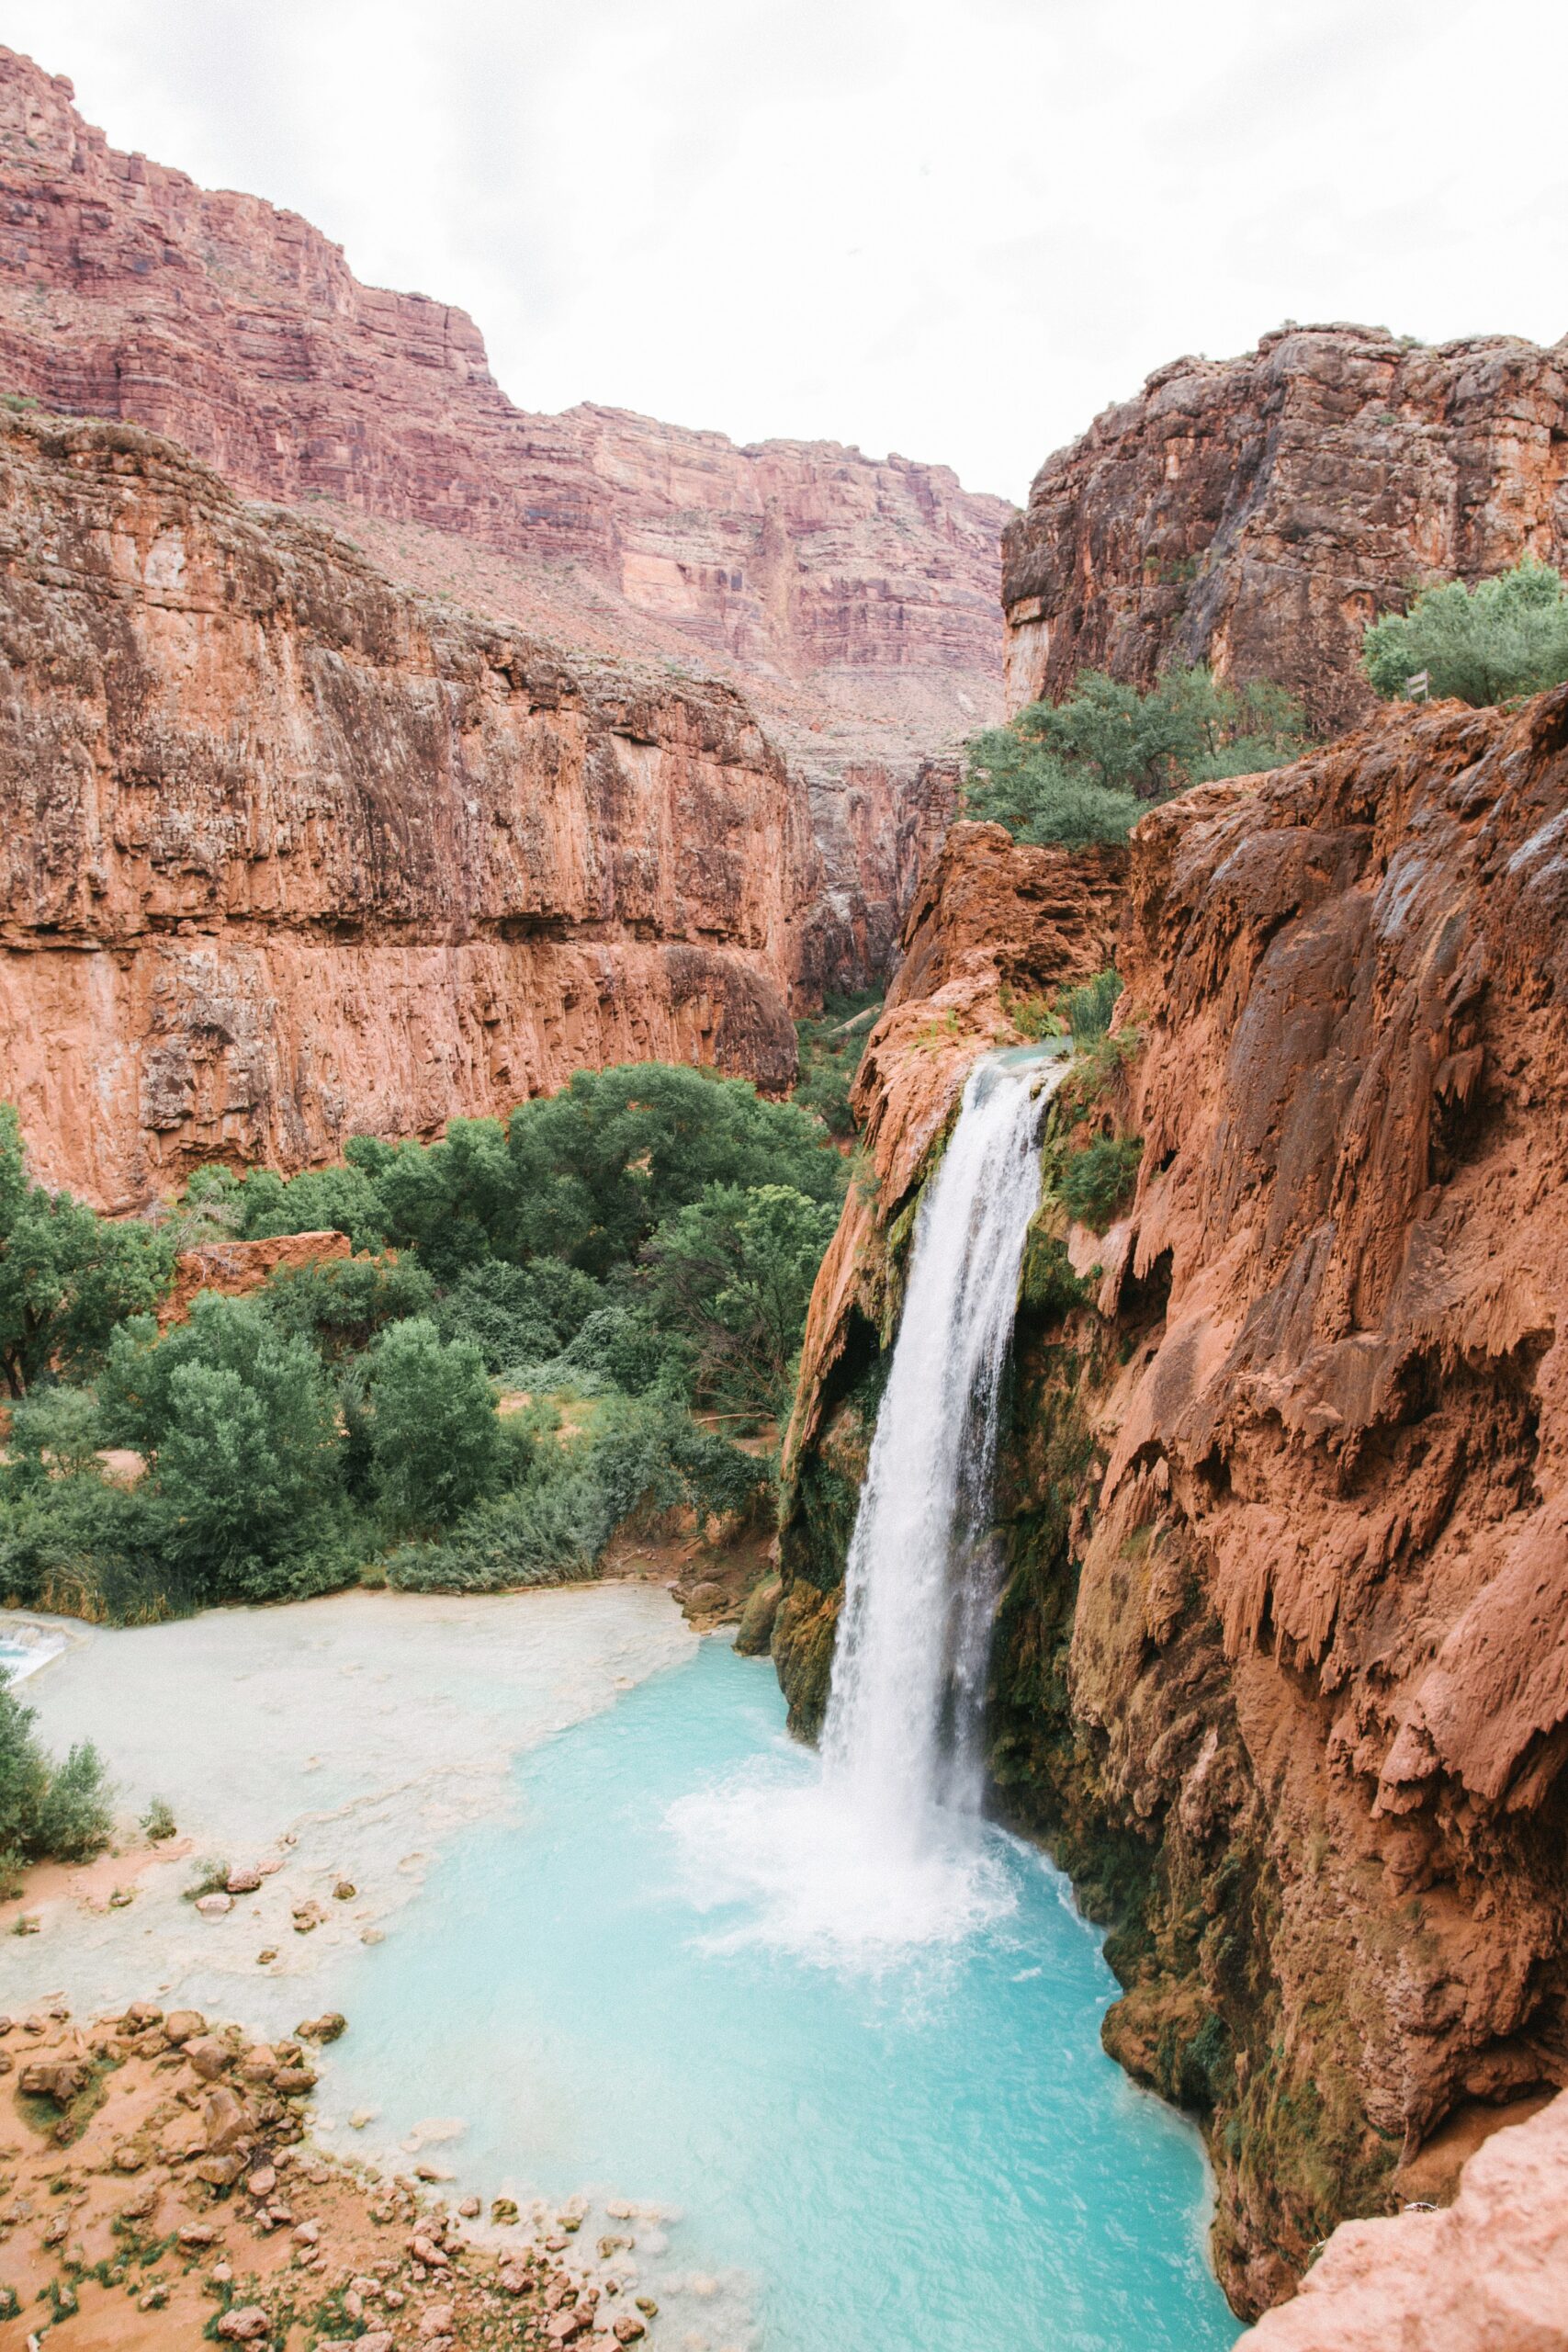 Can You Drive an RV to the Grand Canyon?